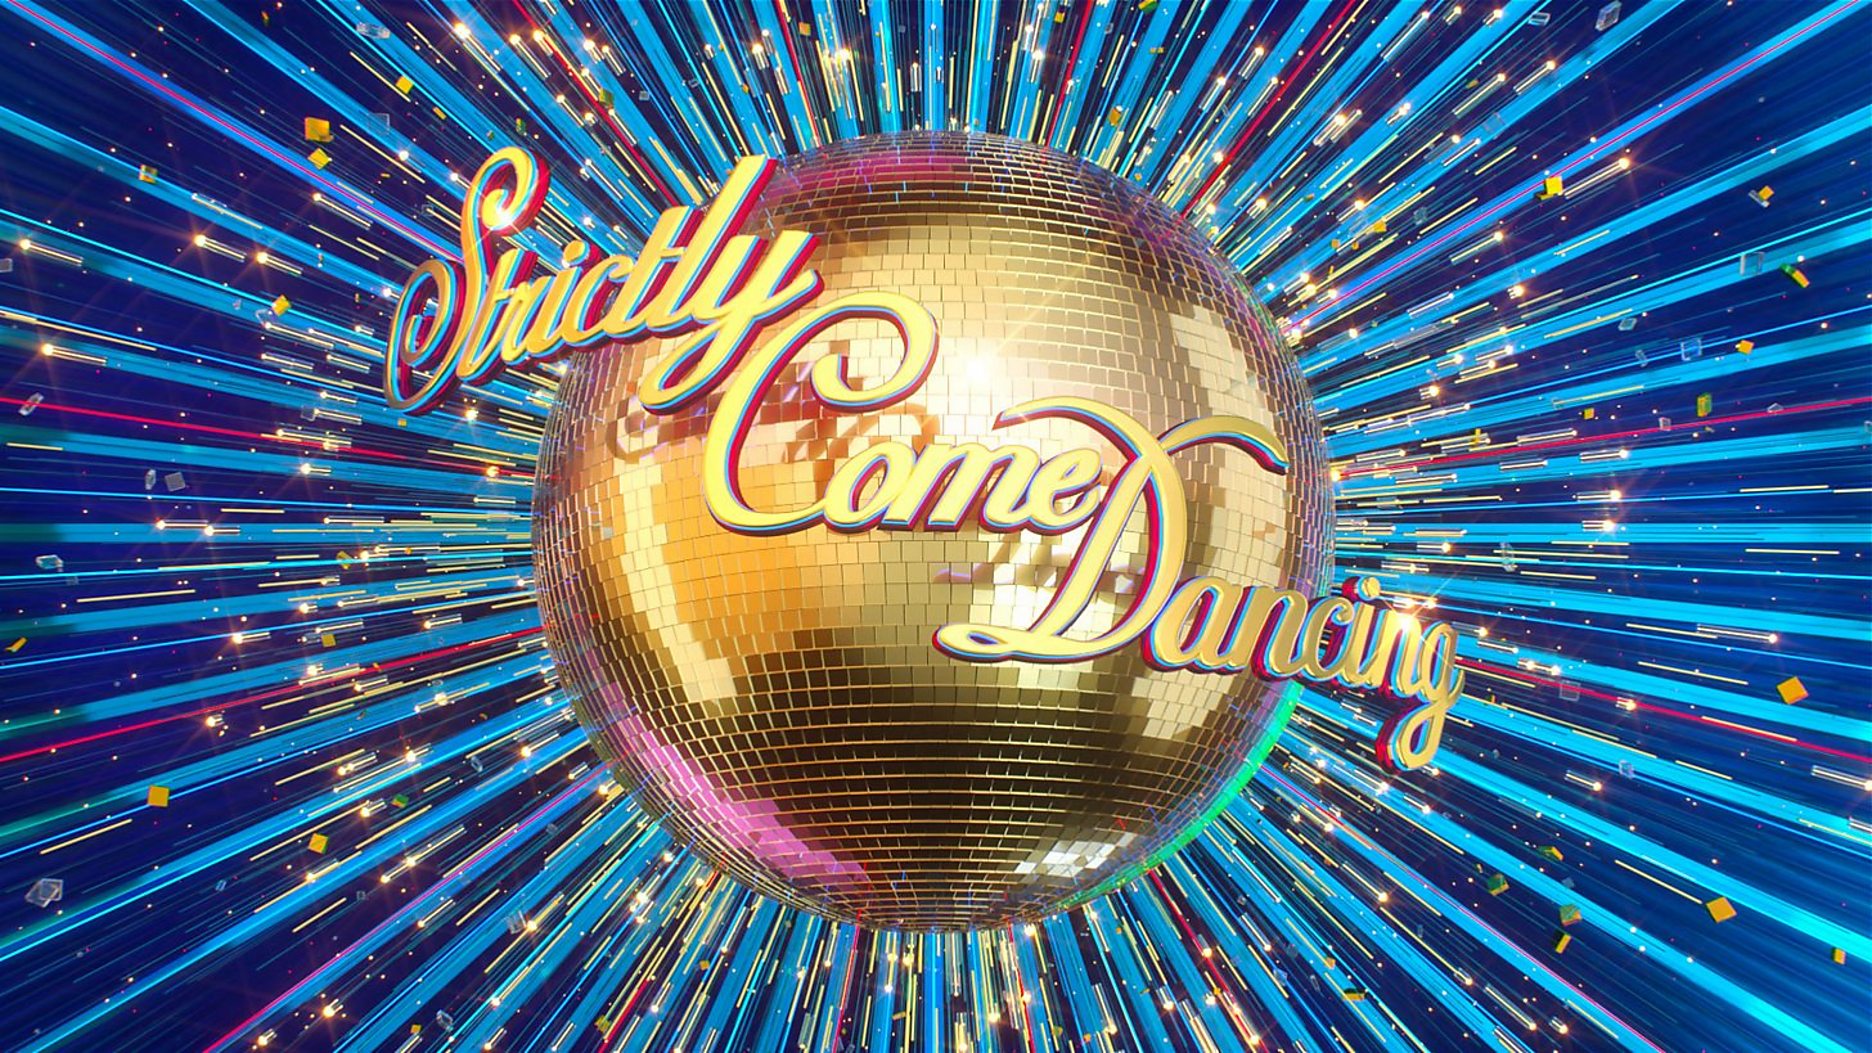 When does Strictly Come Dancing 2023 start? What time is it on?